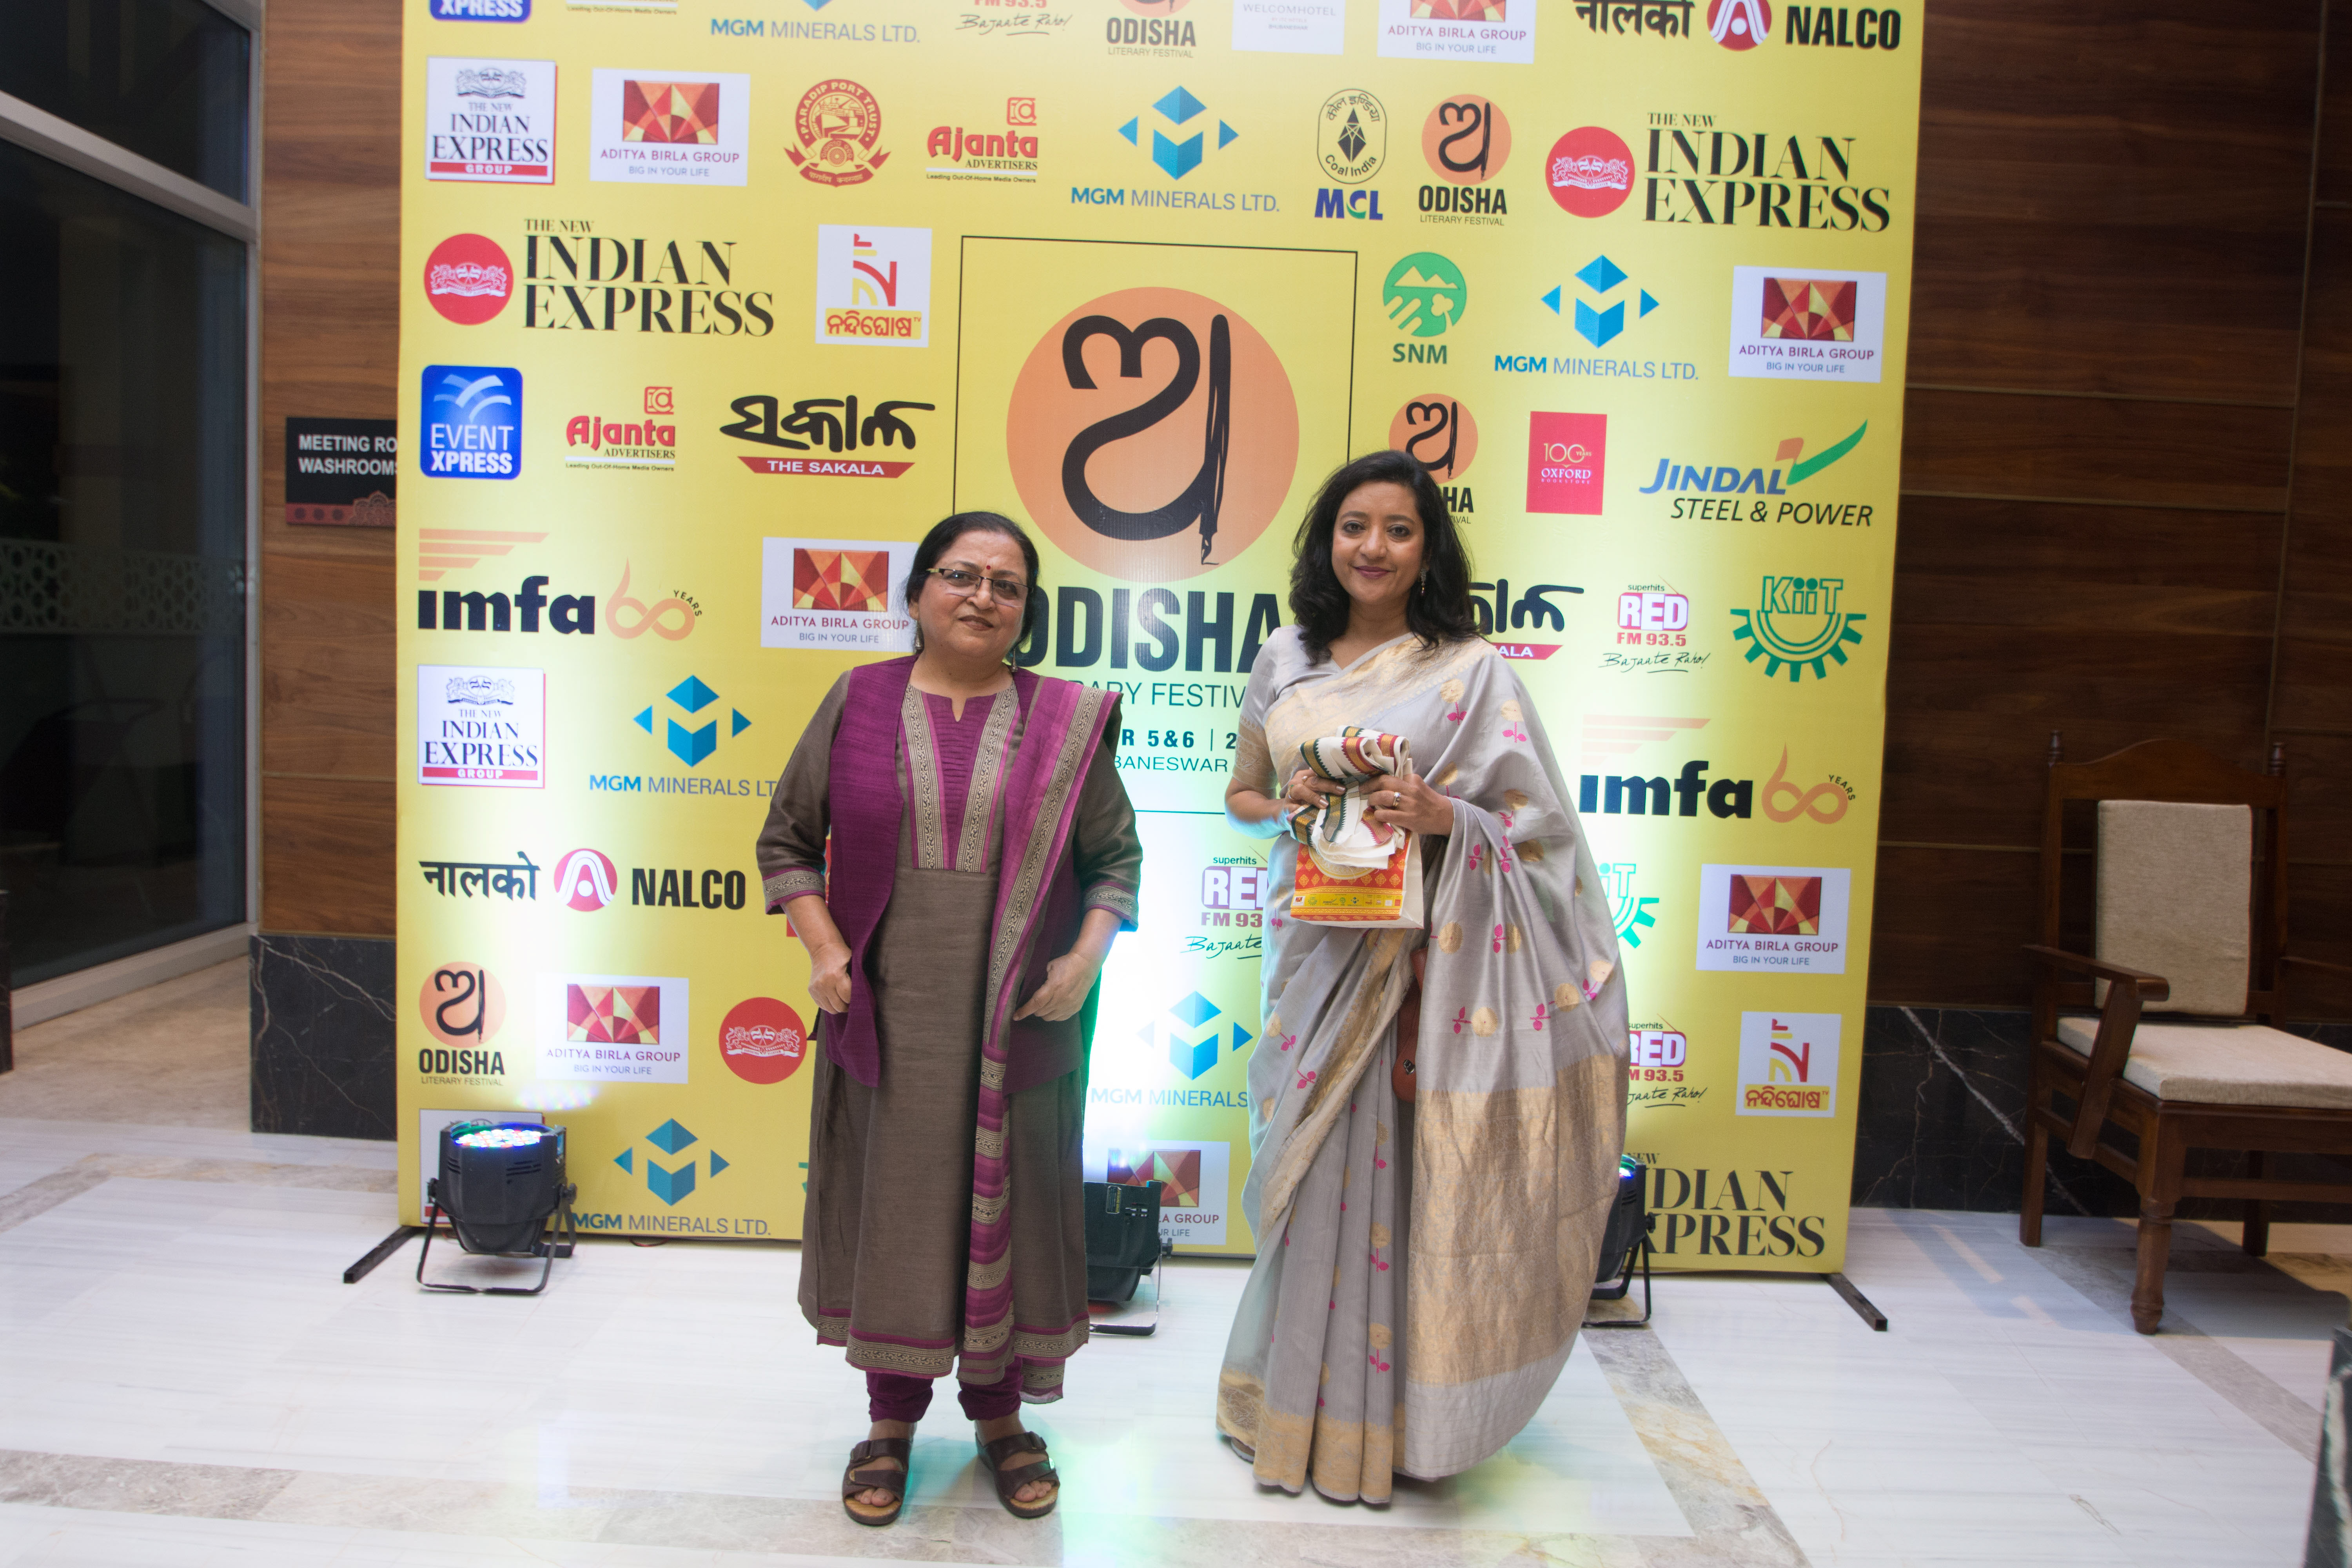 From left to right - Madhu Kishwar, Academic and researcher and Ghazala Wahab, Editor and author, on the first day of Odisha Literay Festival in Bhubaneswar. Express / DEBADATTA MALLICK